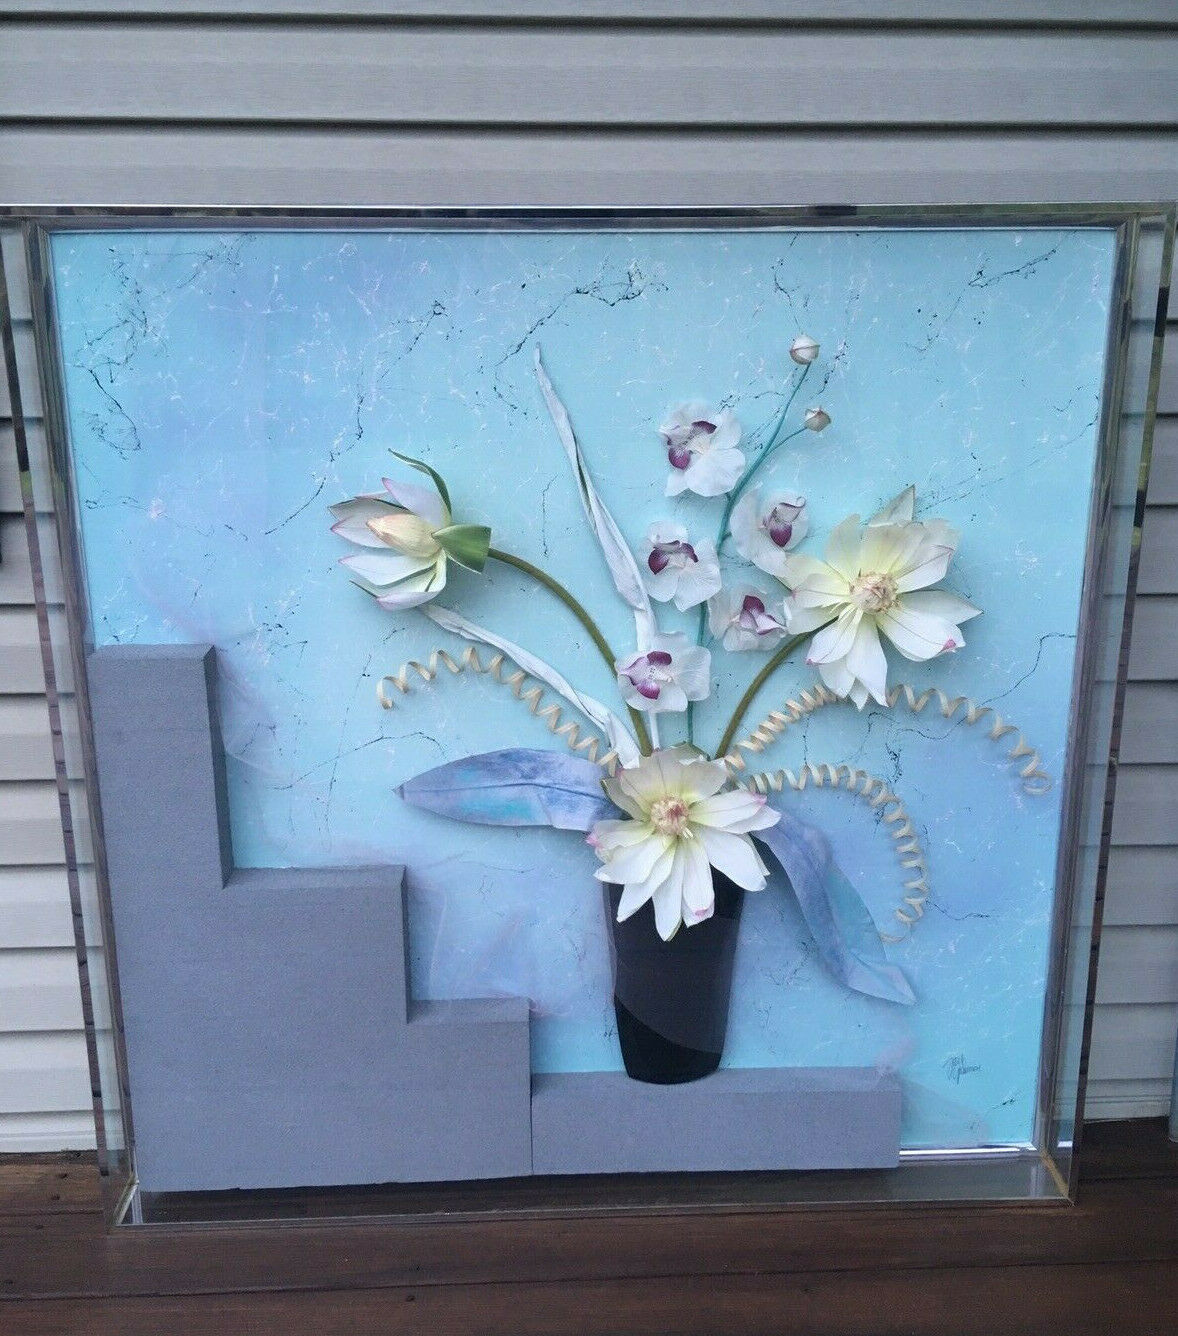 Modern Pop 3d Art Jon Gilmore Signed Mixed Media 80s Faux Floral Diorama Retro